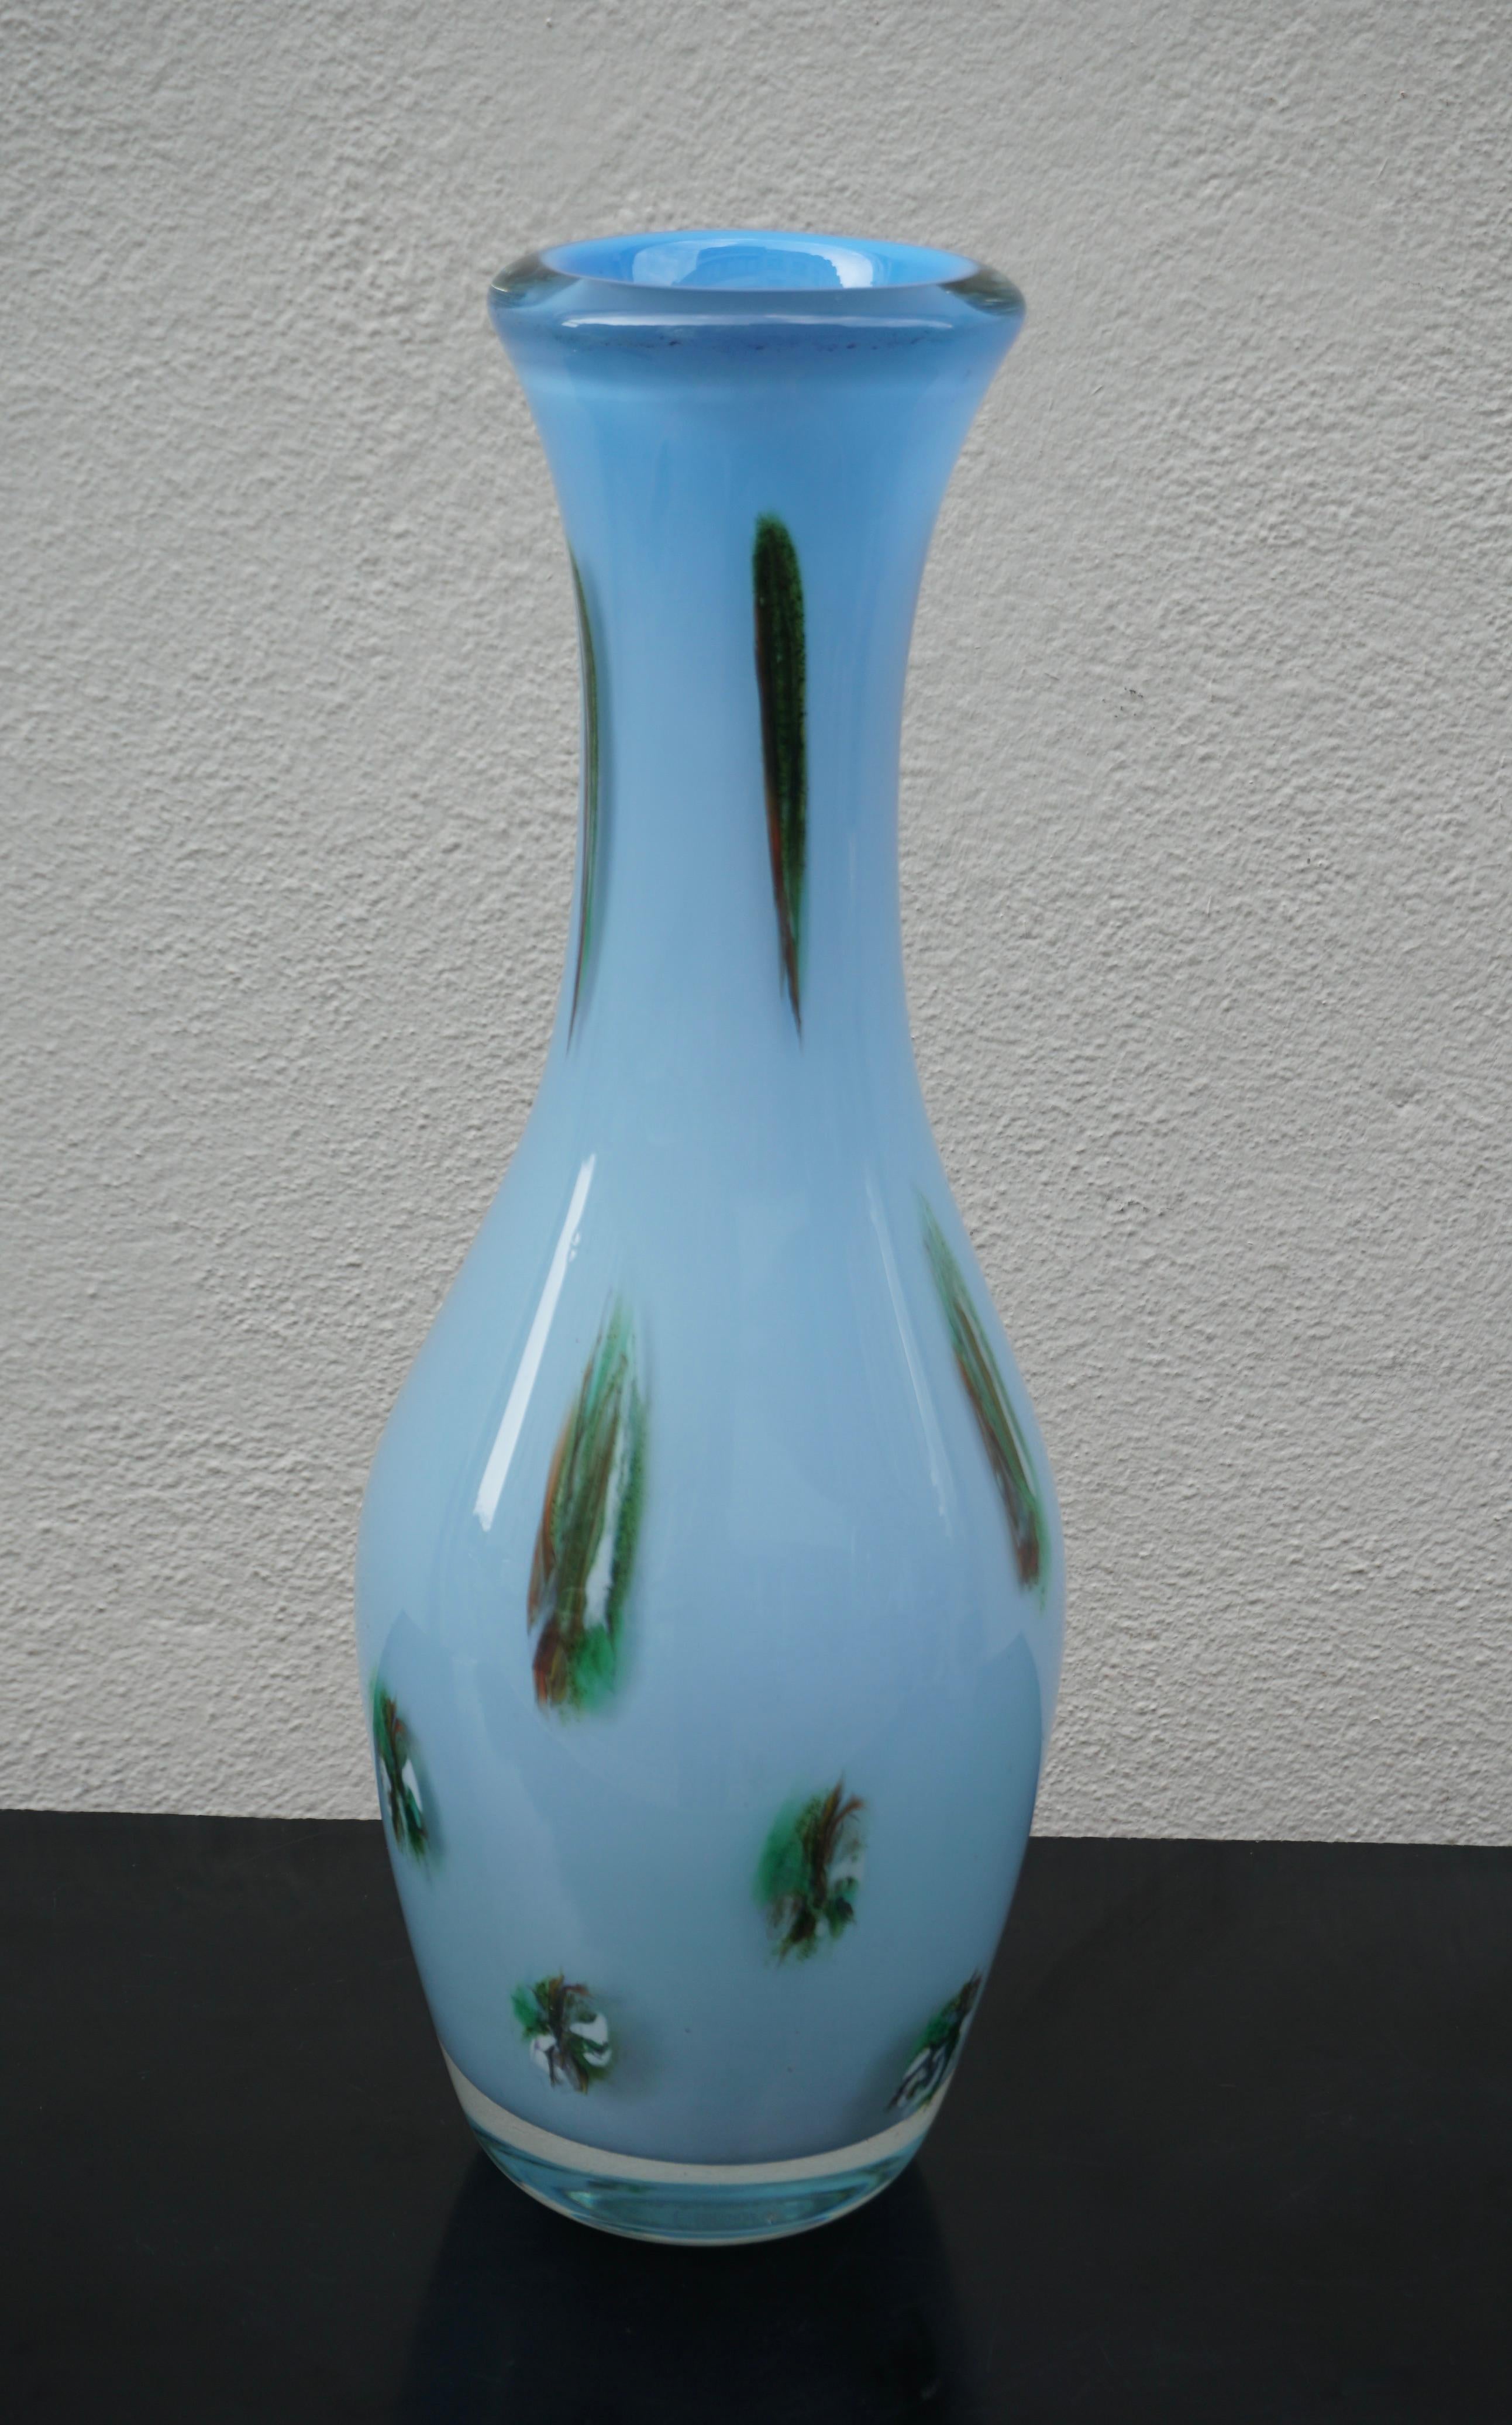 Very beautiful vintage Italian Murano glass vase. 
Dating from the 1960s.

Dimensions: 
Height: 17.3